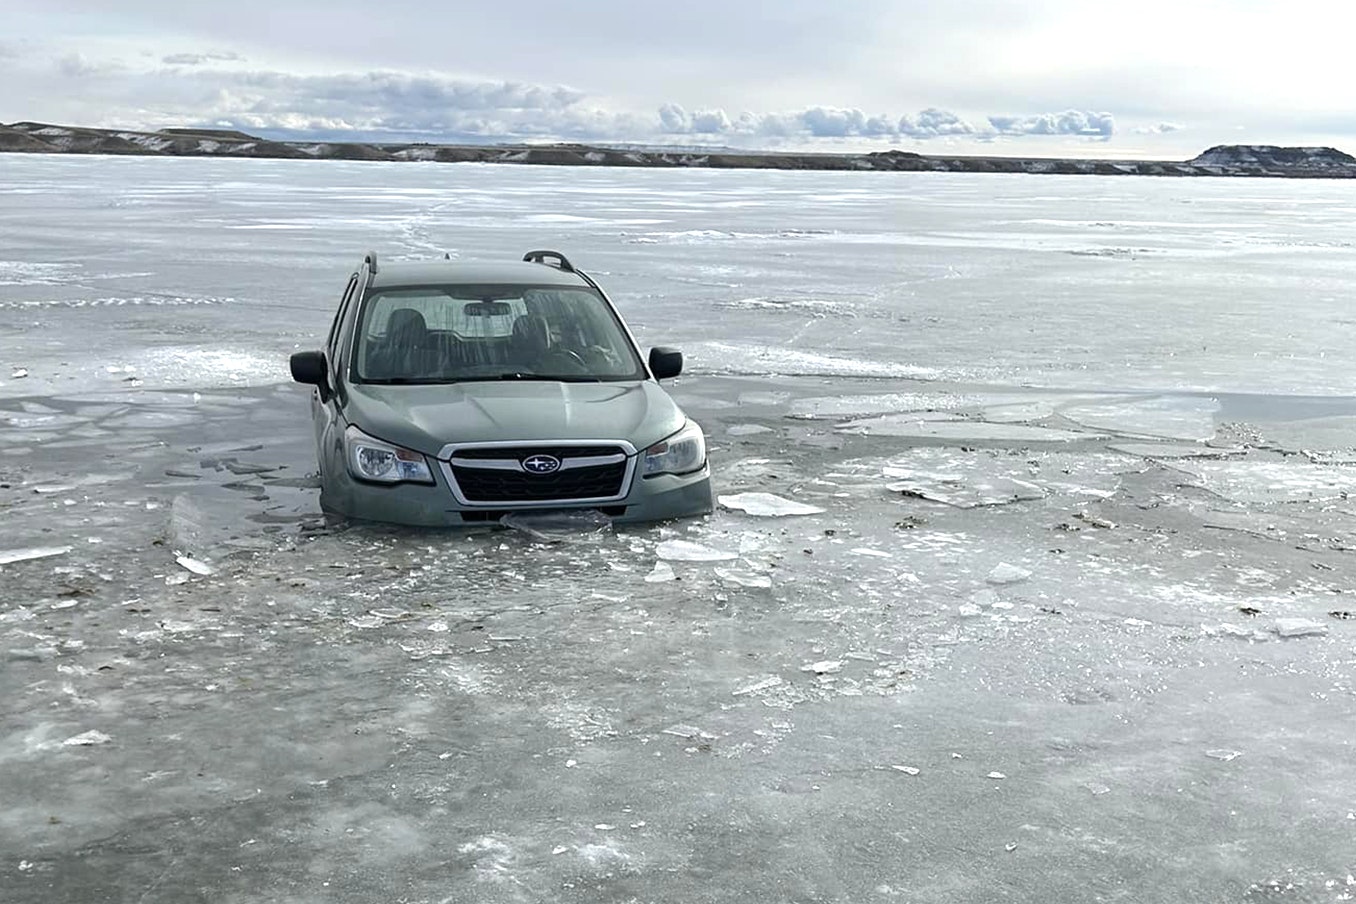 This Subaru is one of two vehicles that have broken through the ice on Boysen Reservoir in the past week.